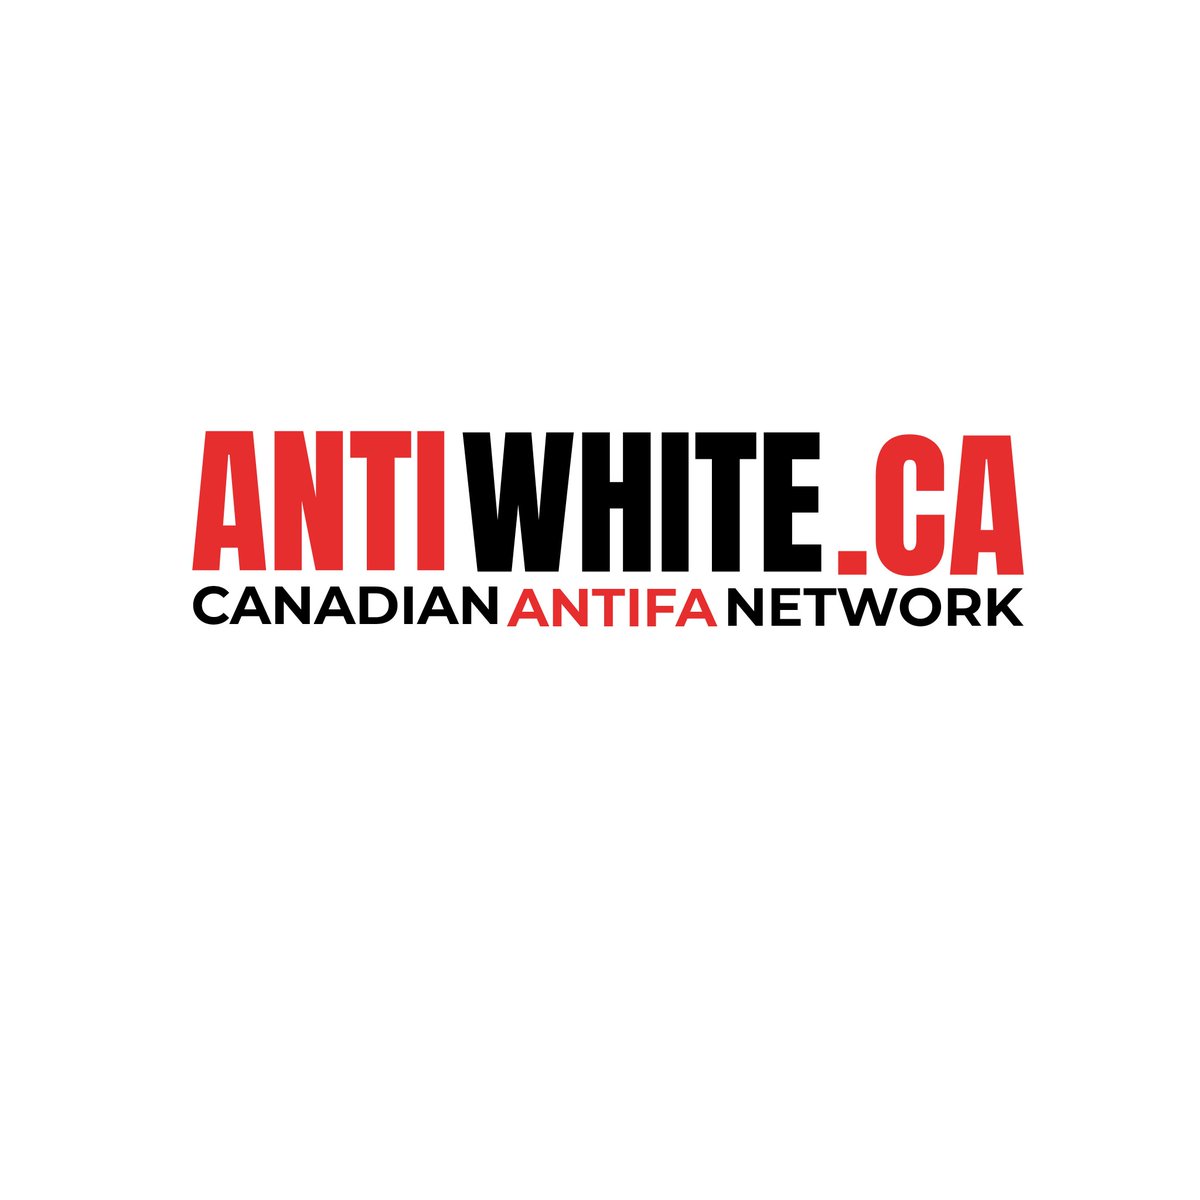 'Antihate' is a government funded Marxist, anti white hate group
#BanCAHN